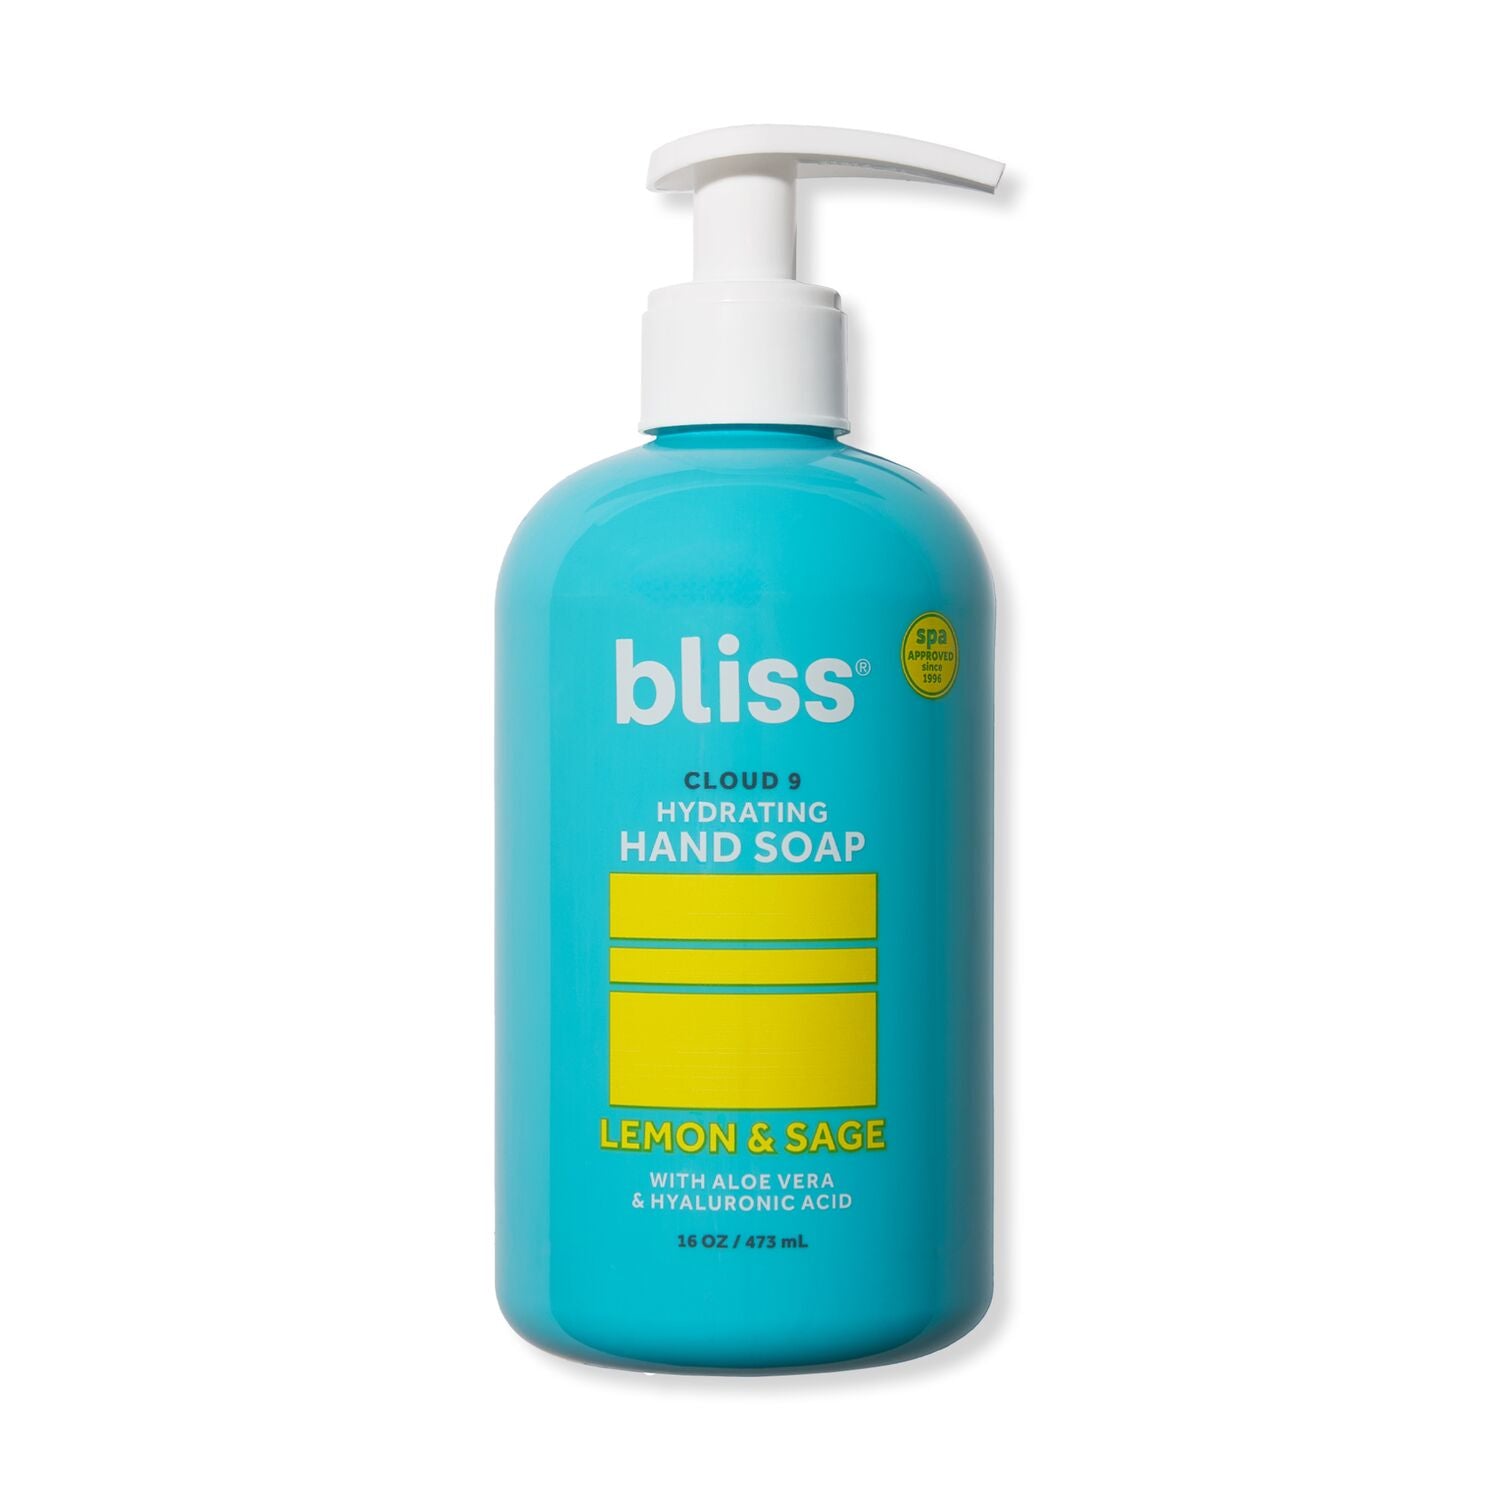 Bliss Cloud 9 Hydrating Hand Soap, Lemon & Sage With Aloe Vera & Hyaluronic Acid In White